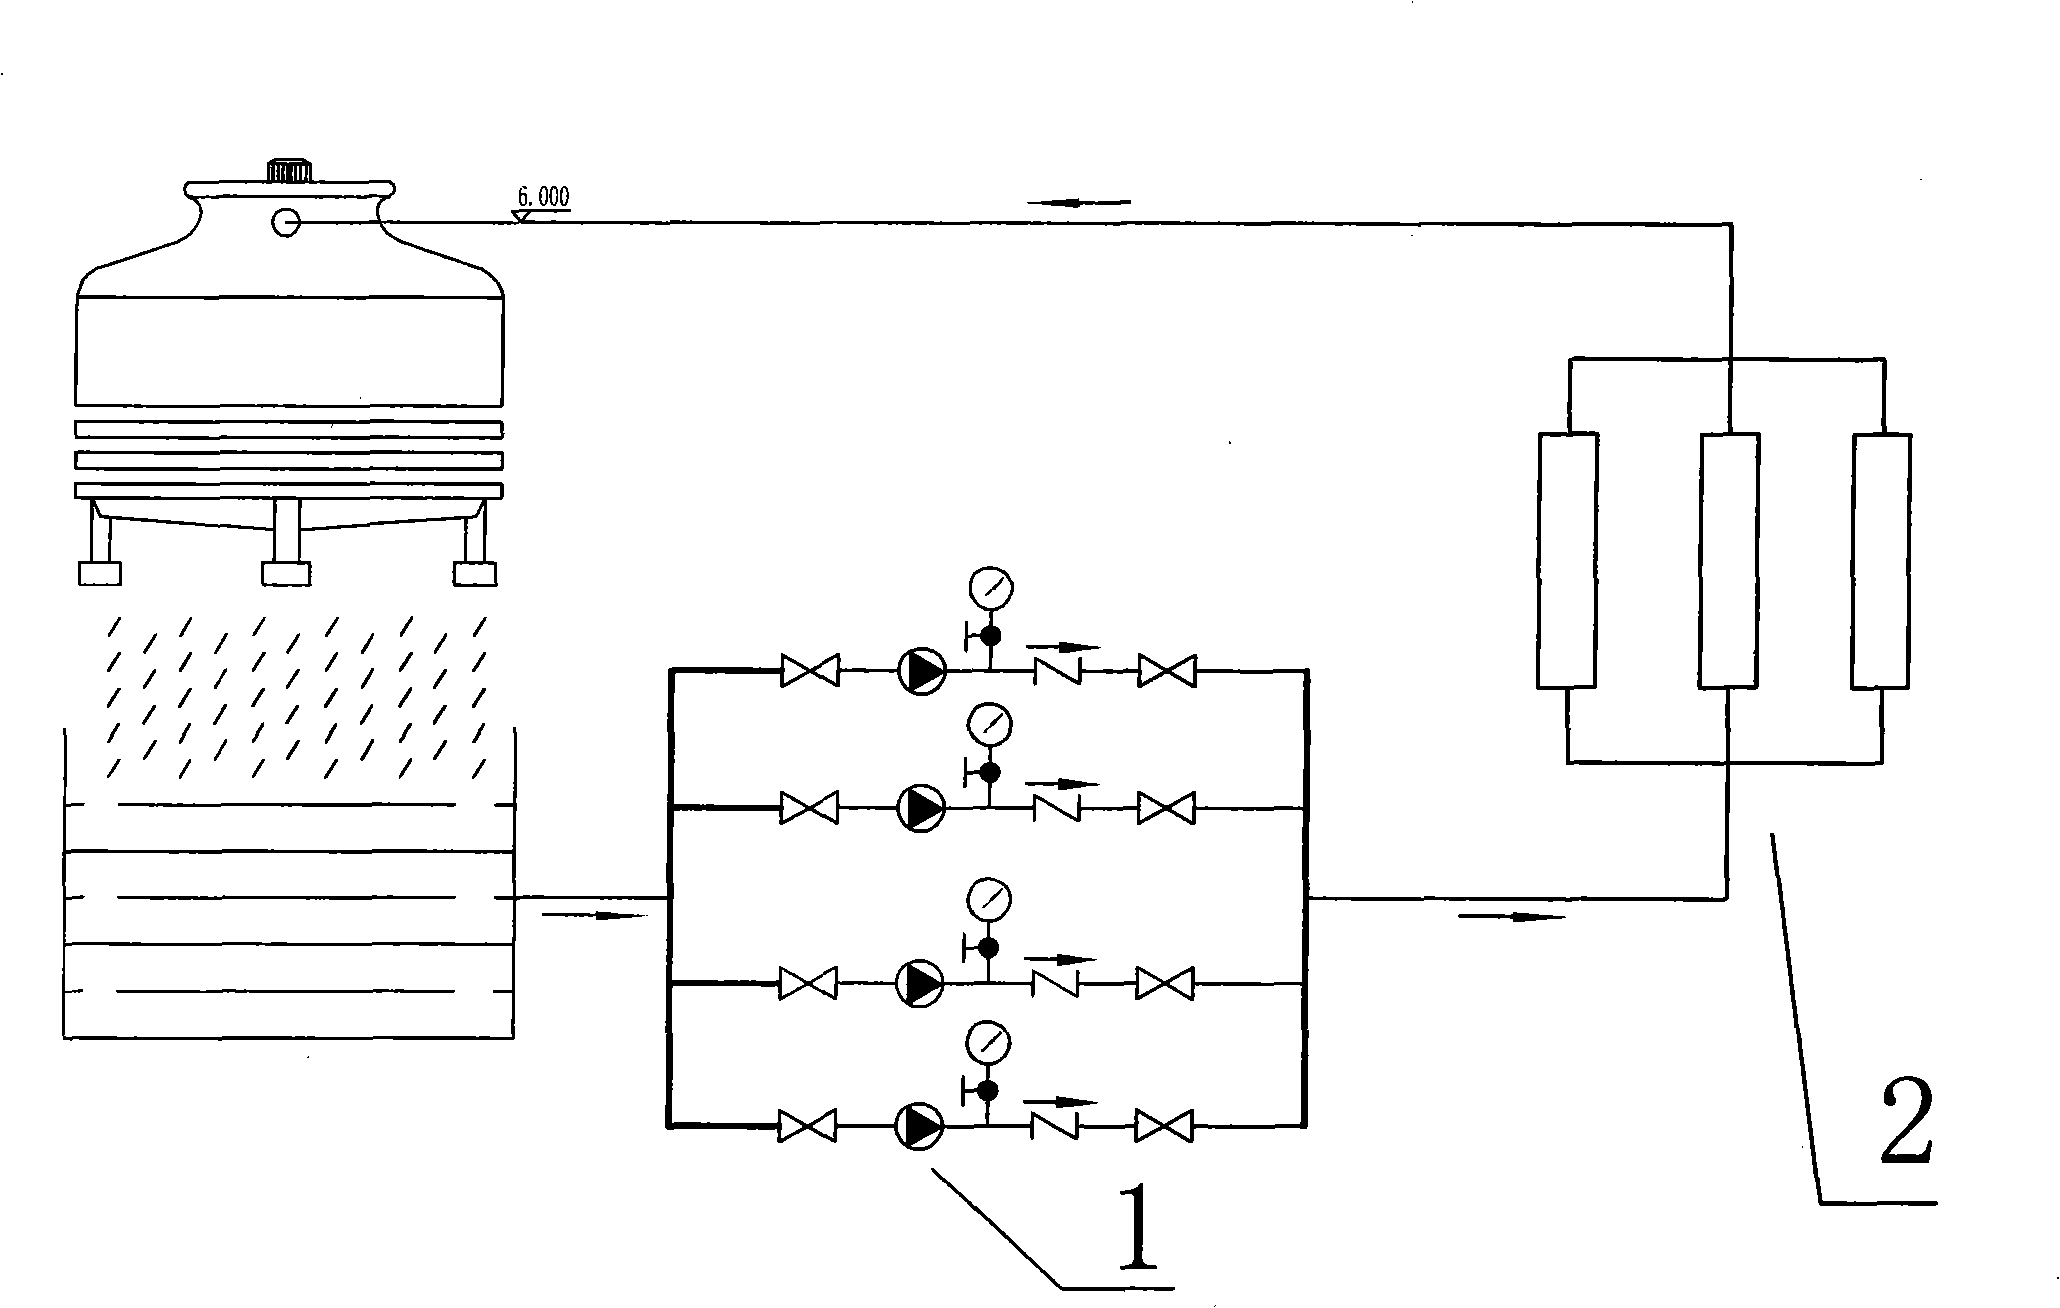 Optimization technique of circulating water body conveying system